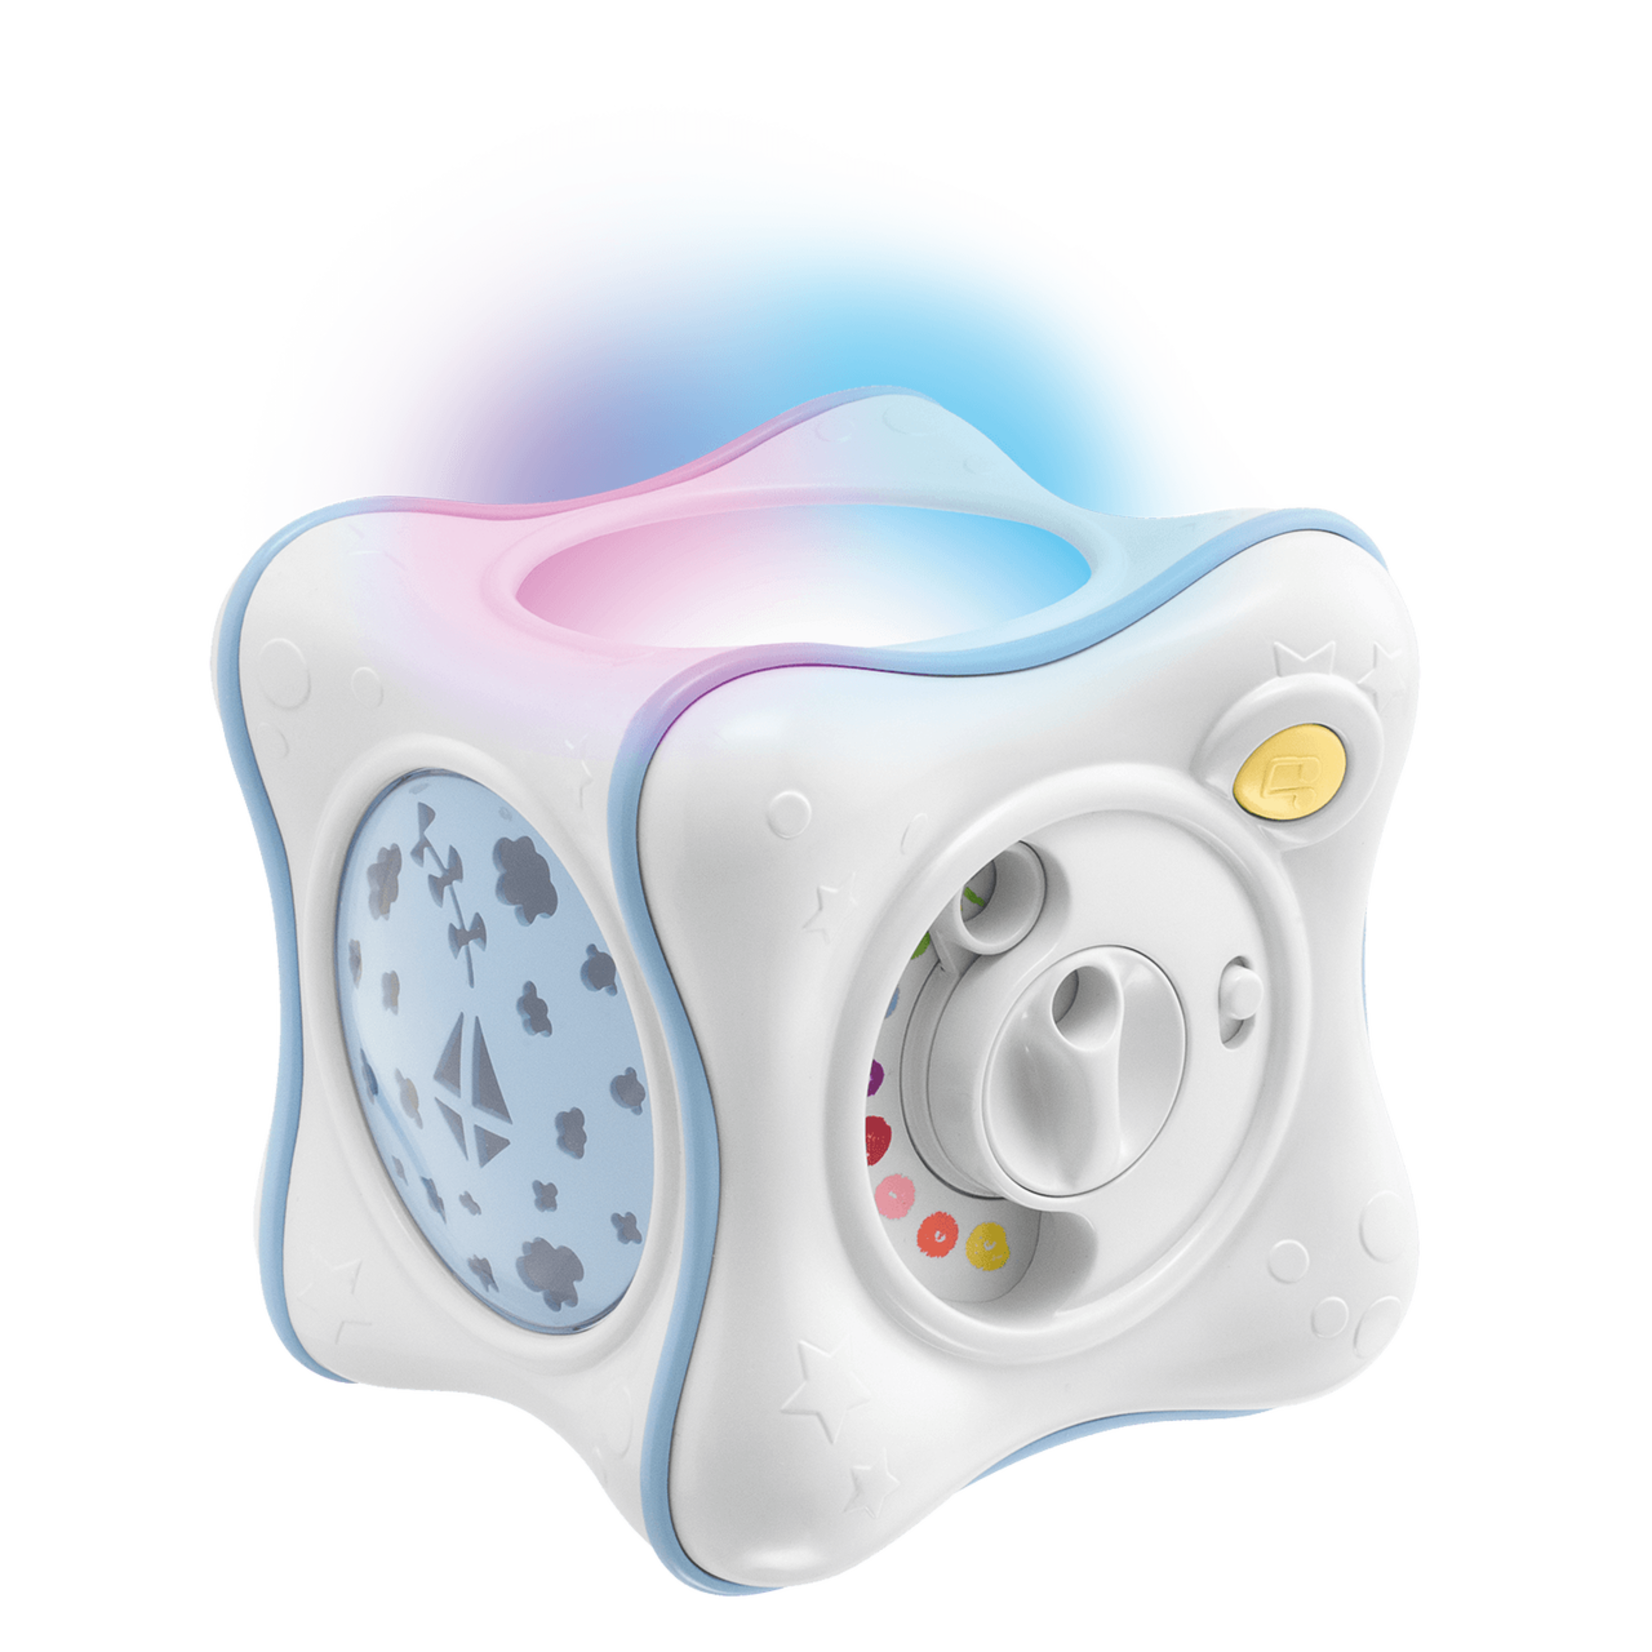 Chicco Chicco Rainbow Cube Projector